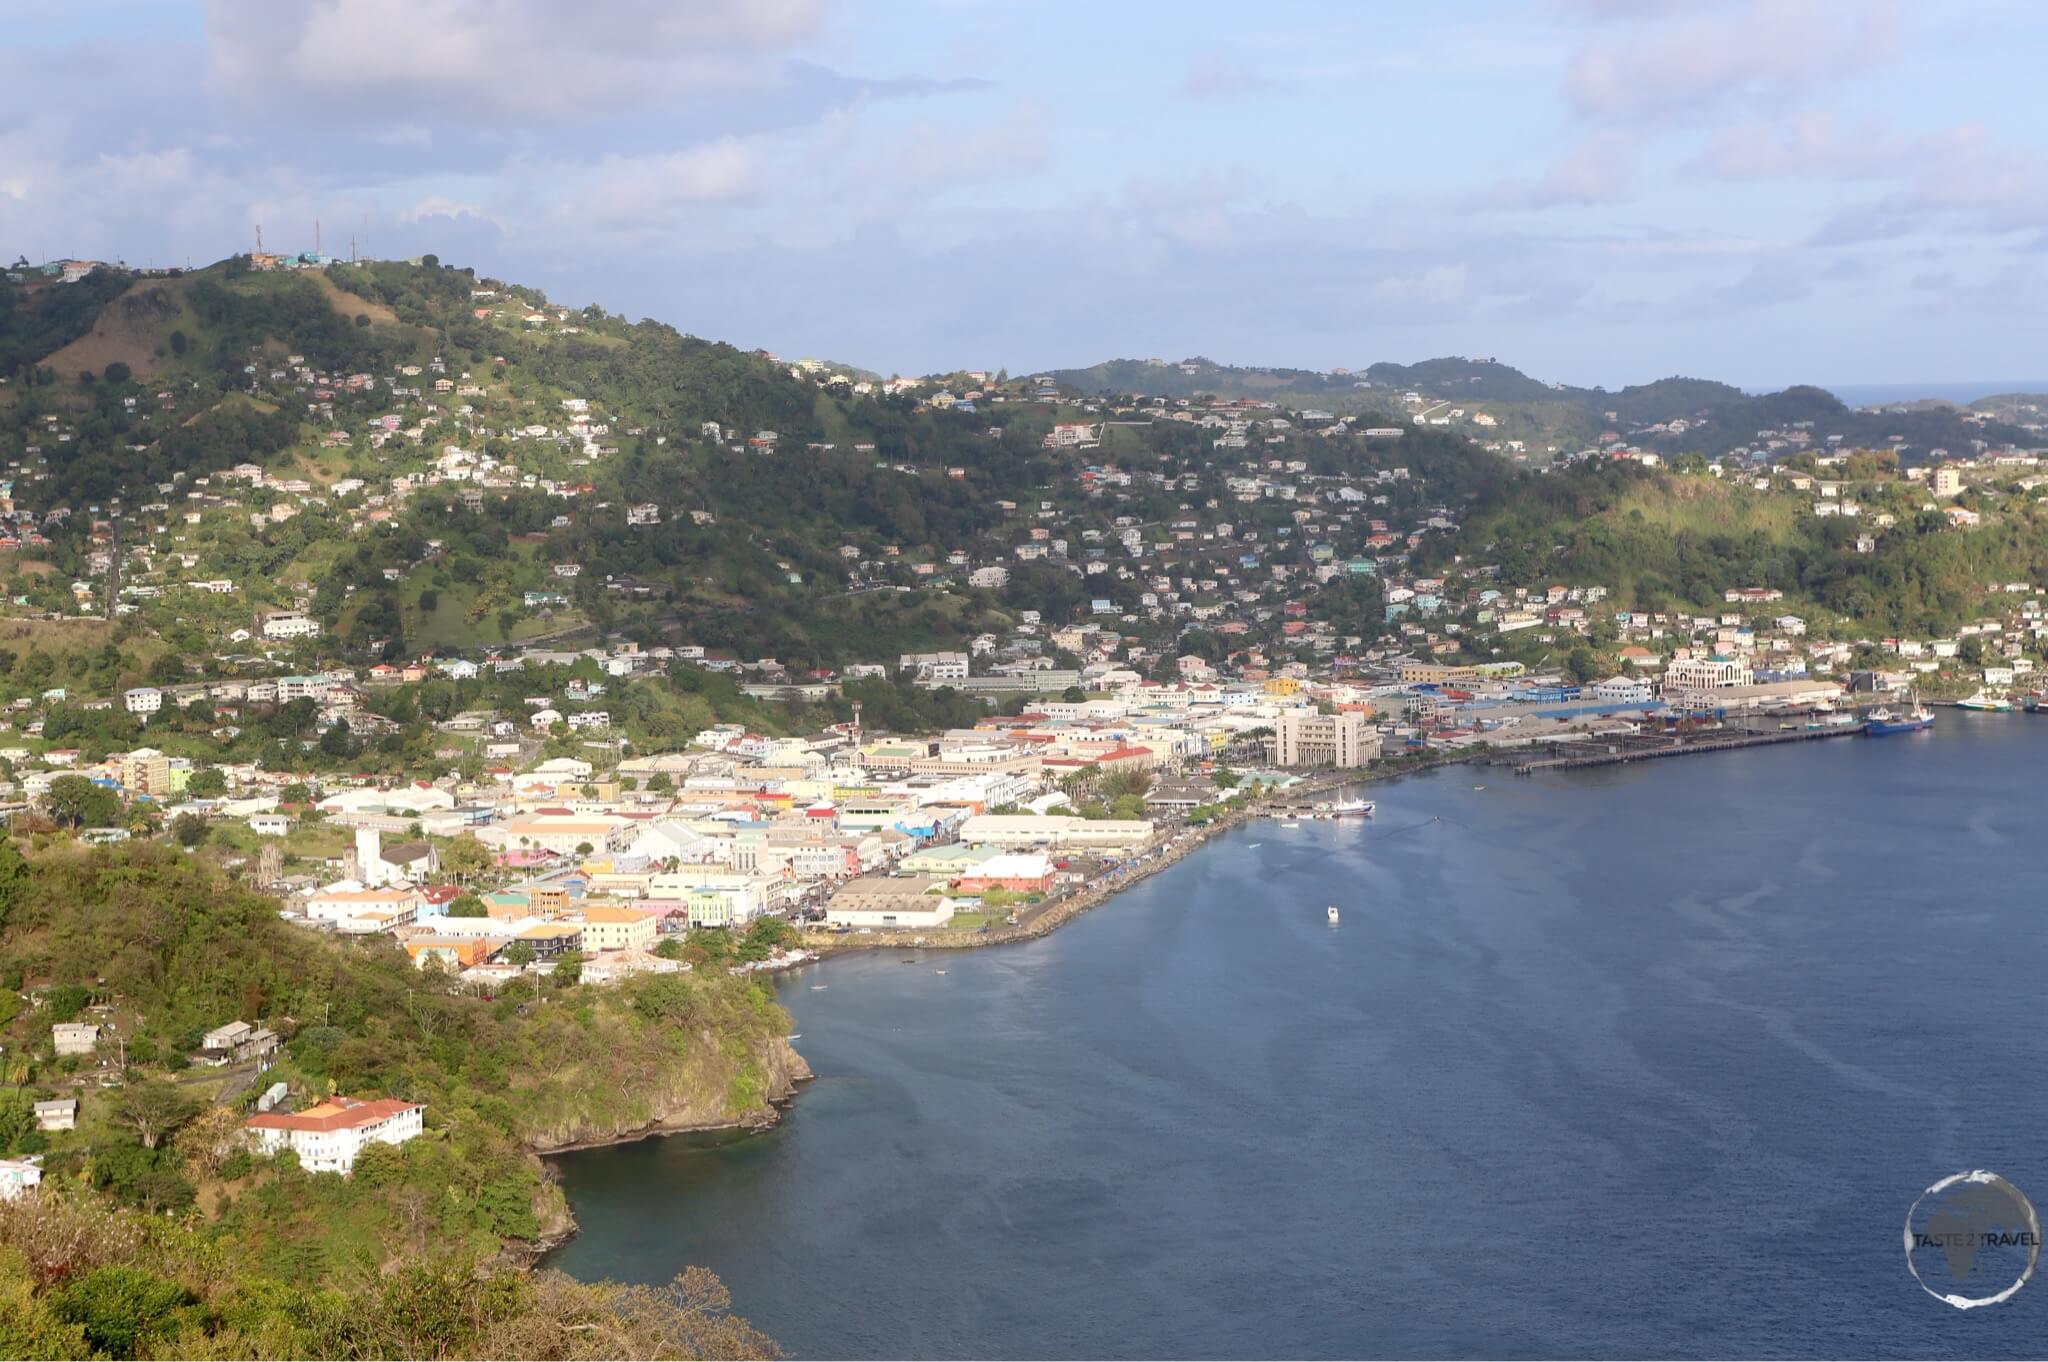 View of Kingstown, the capital of St. Vincent and the Grenadines, from Fort Charlotte.